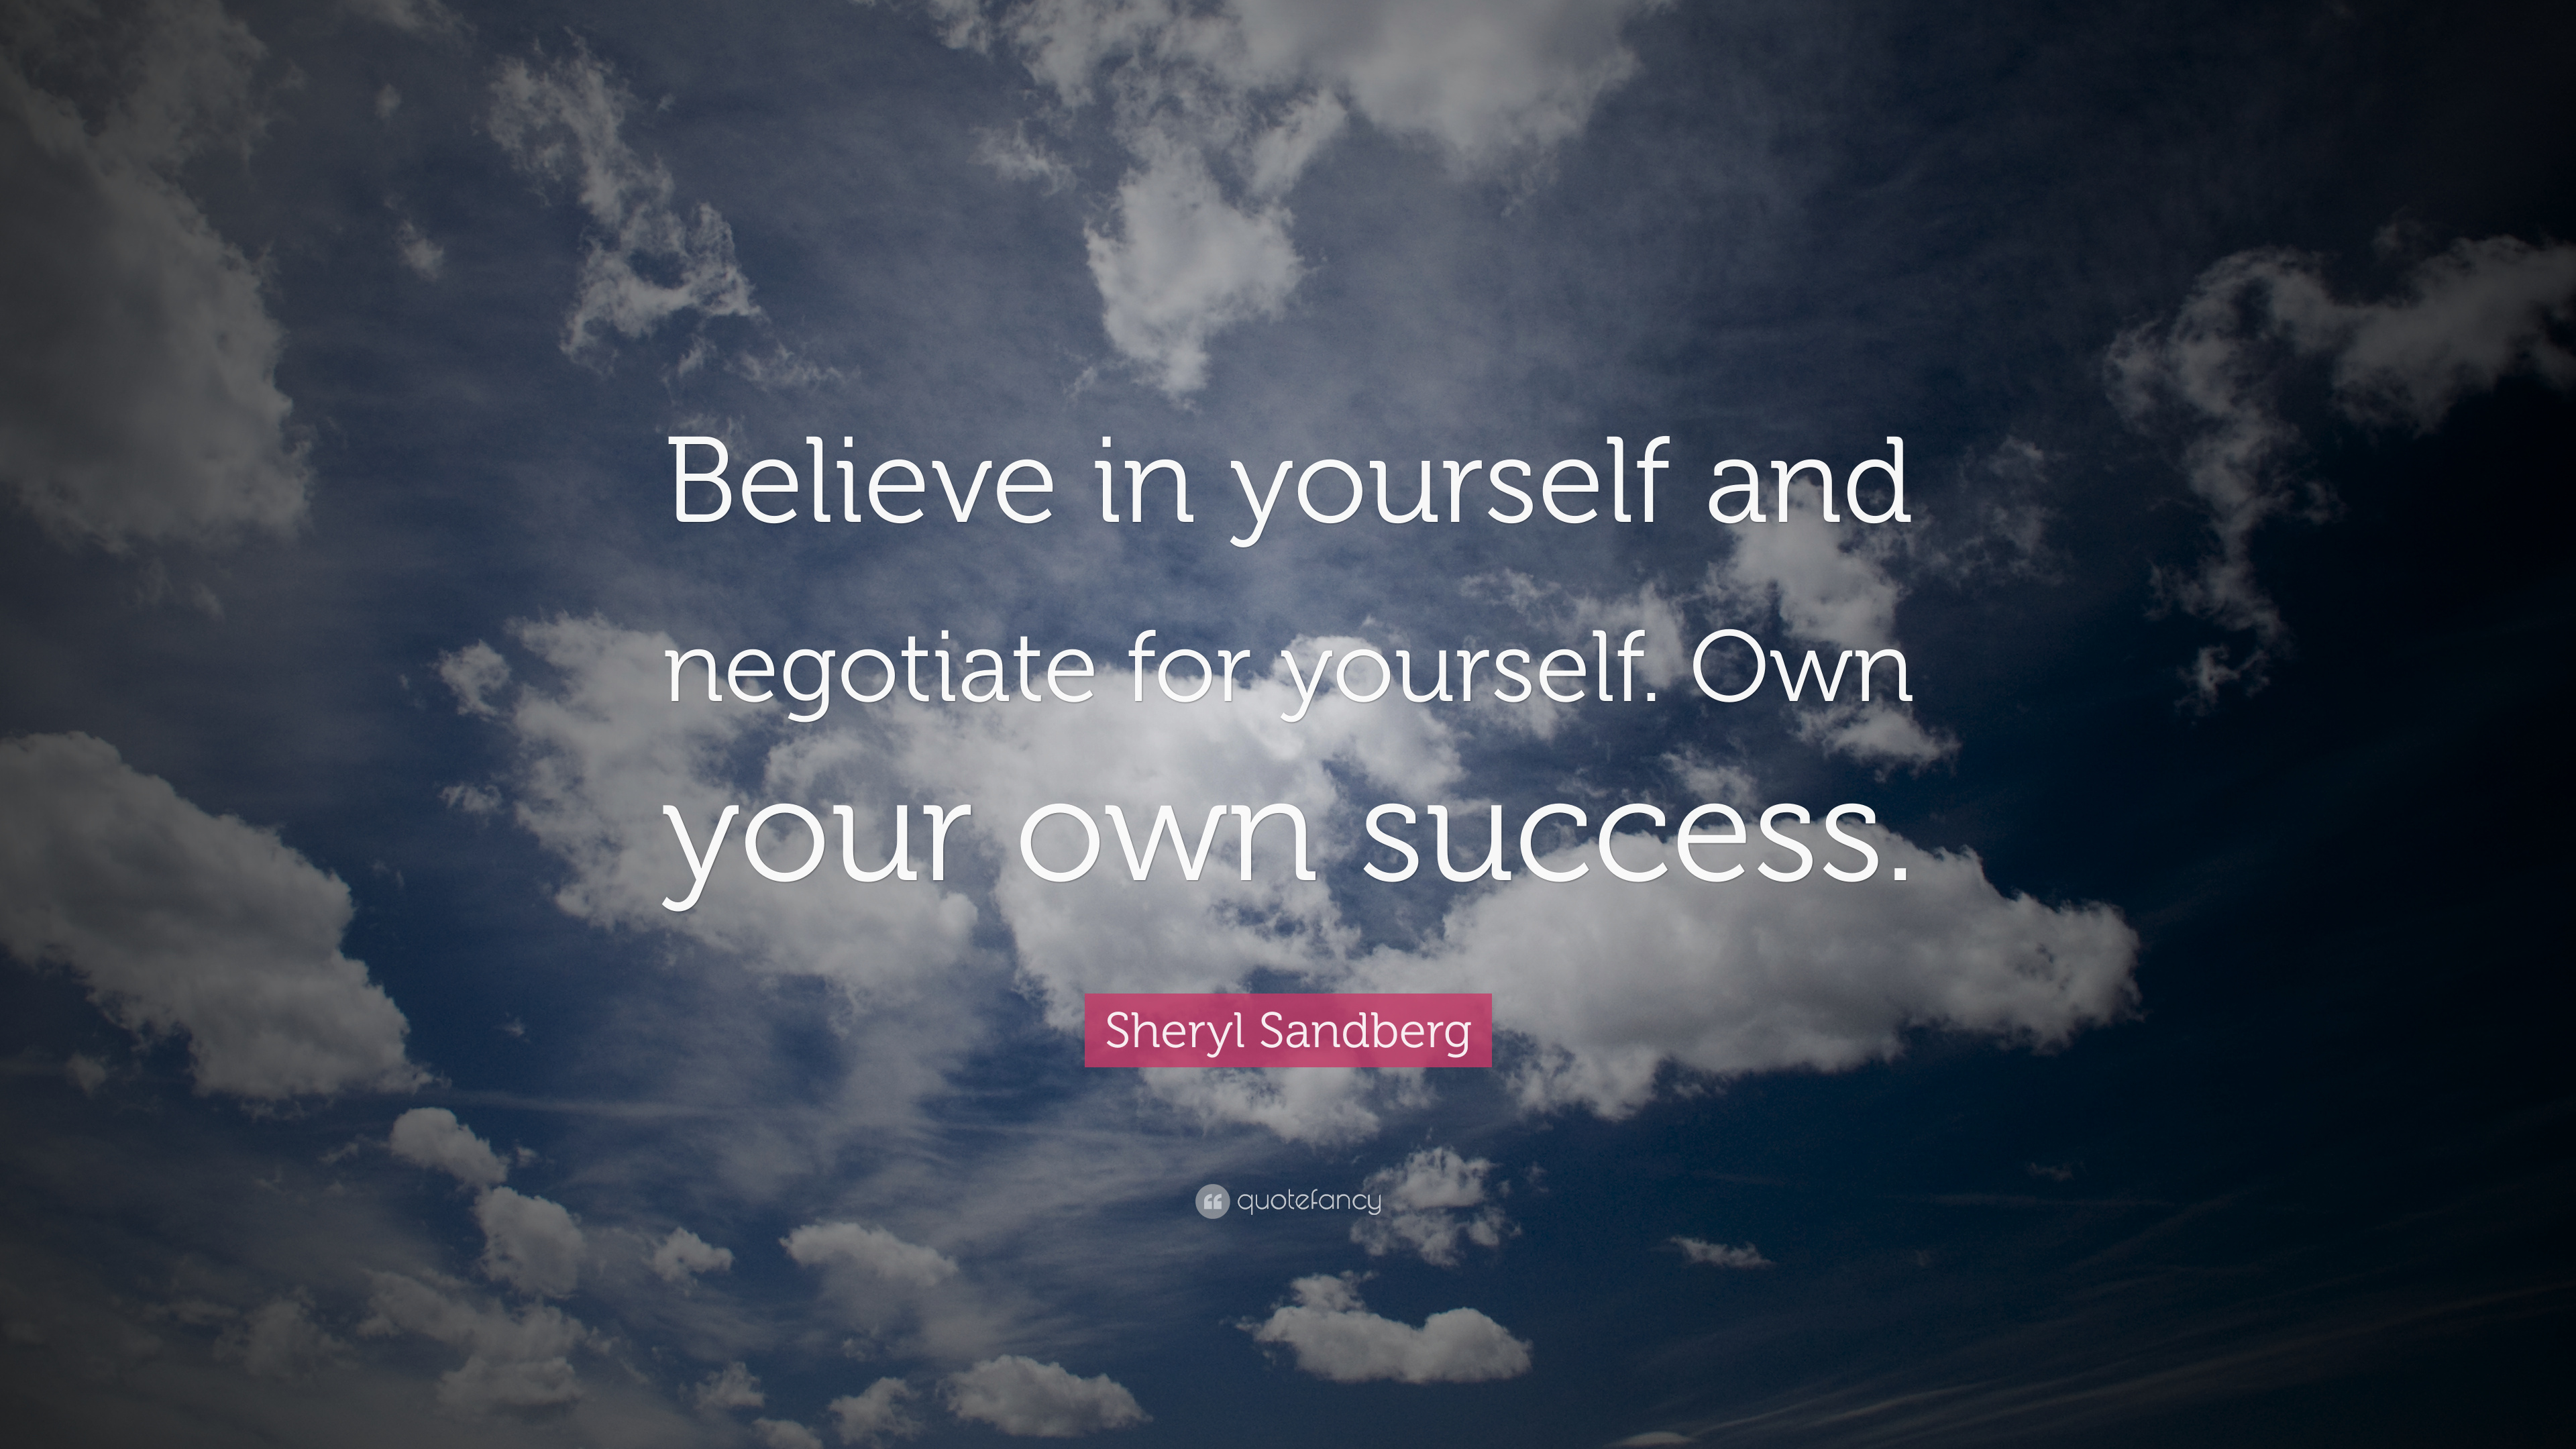 Sheryl Sandberg Quote: “Believe in yourself and negotiate